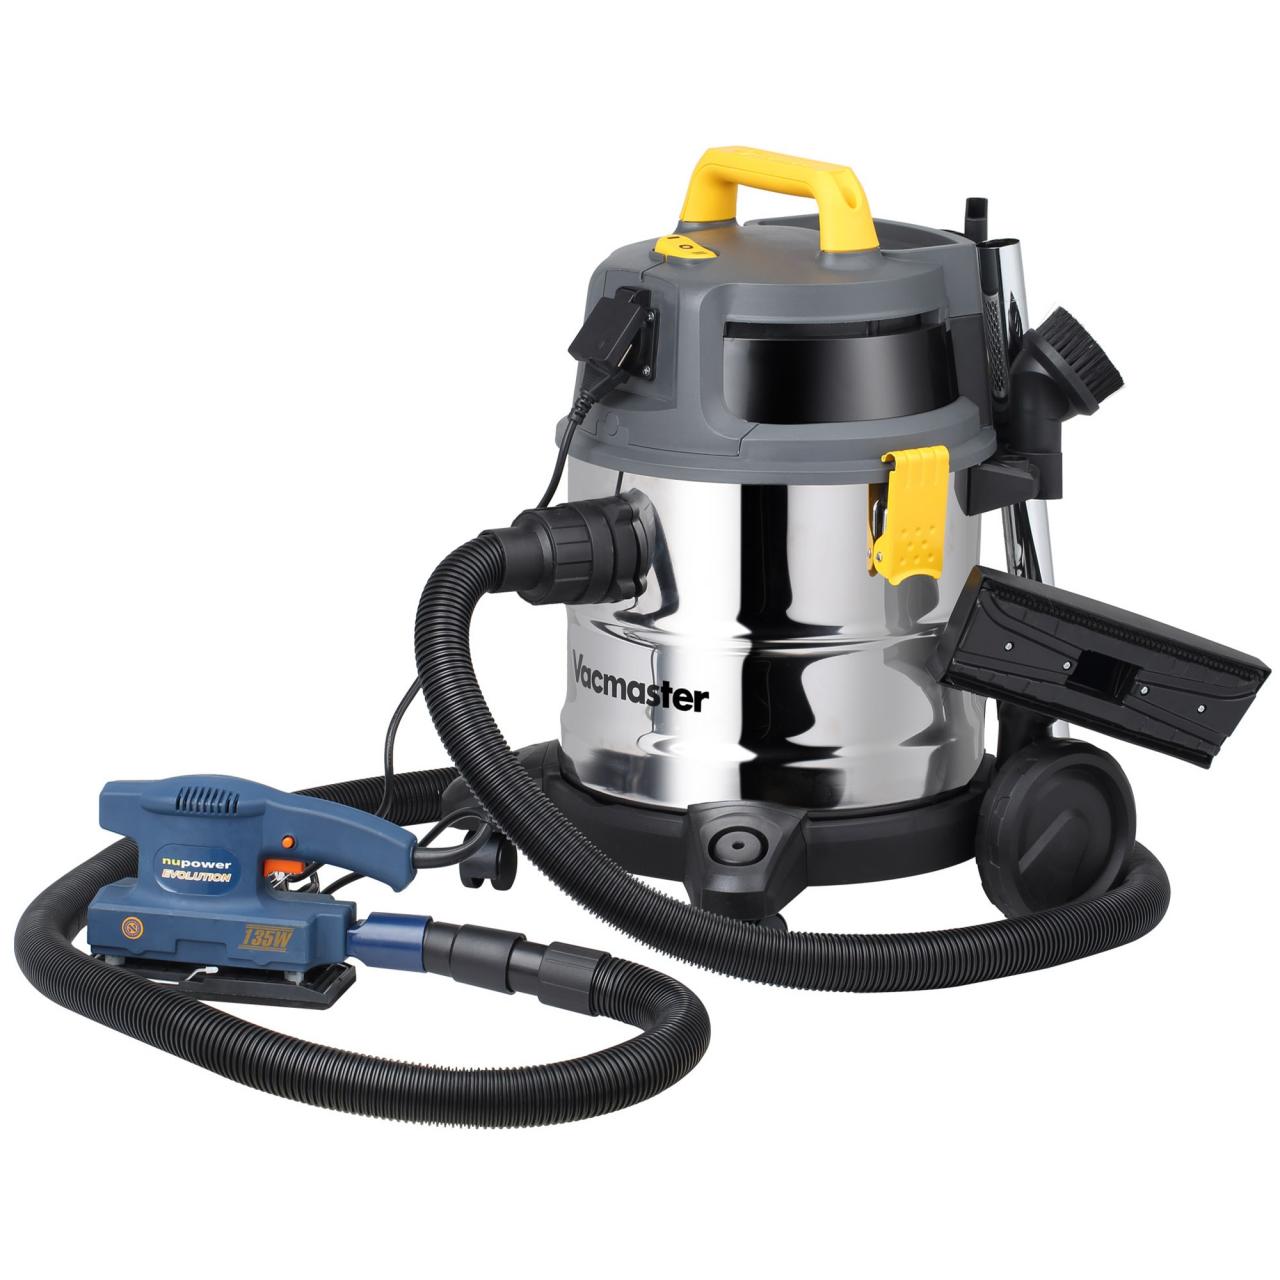 VQ810SWD Stainless Steel Wet/Dry Vac - Vacmaster